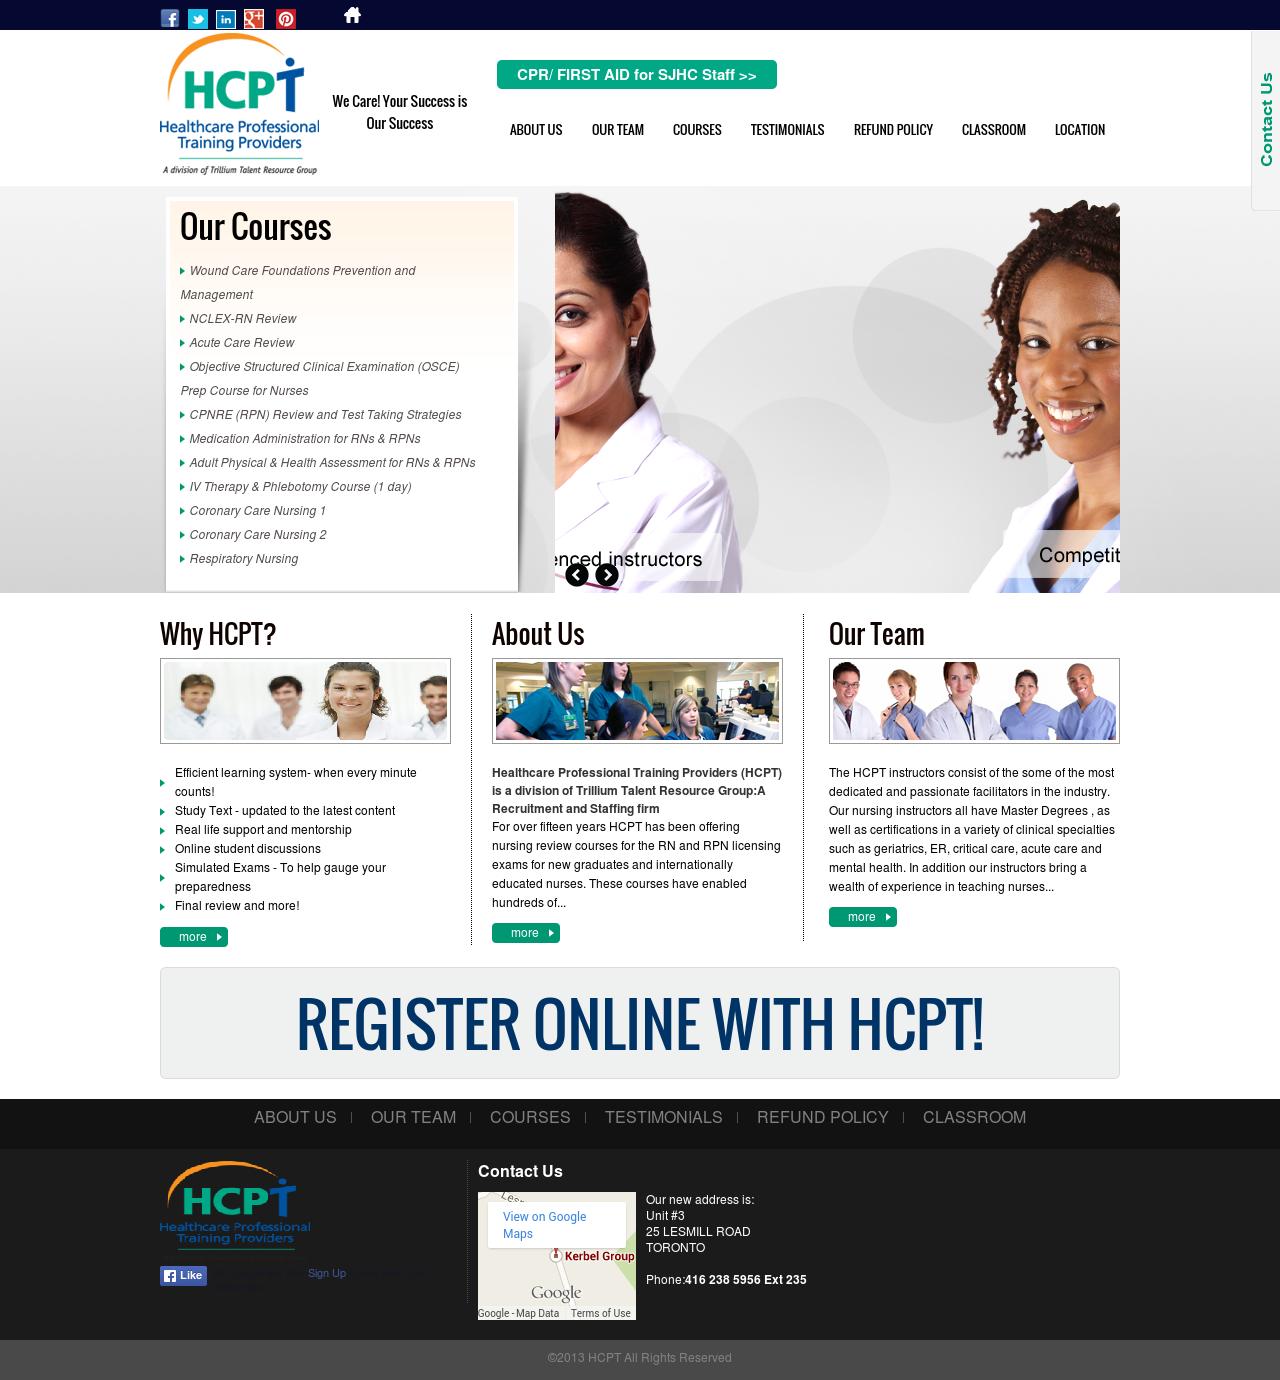 http://www.hcprofessionals.com